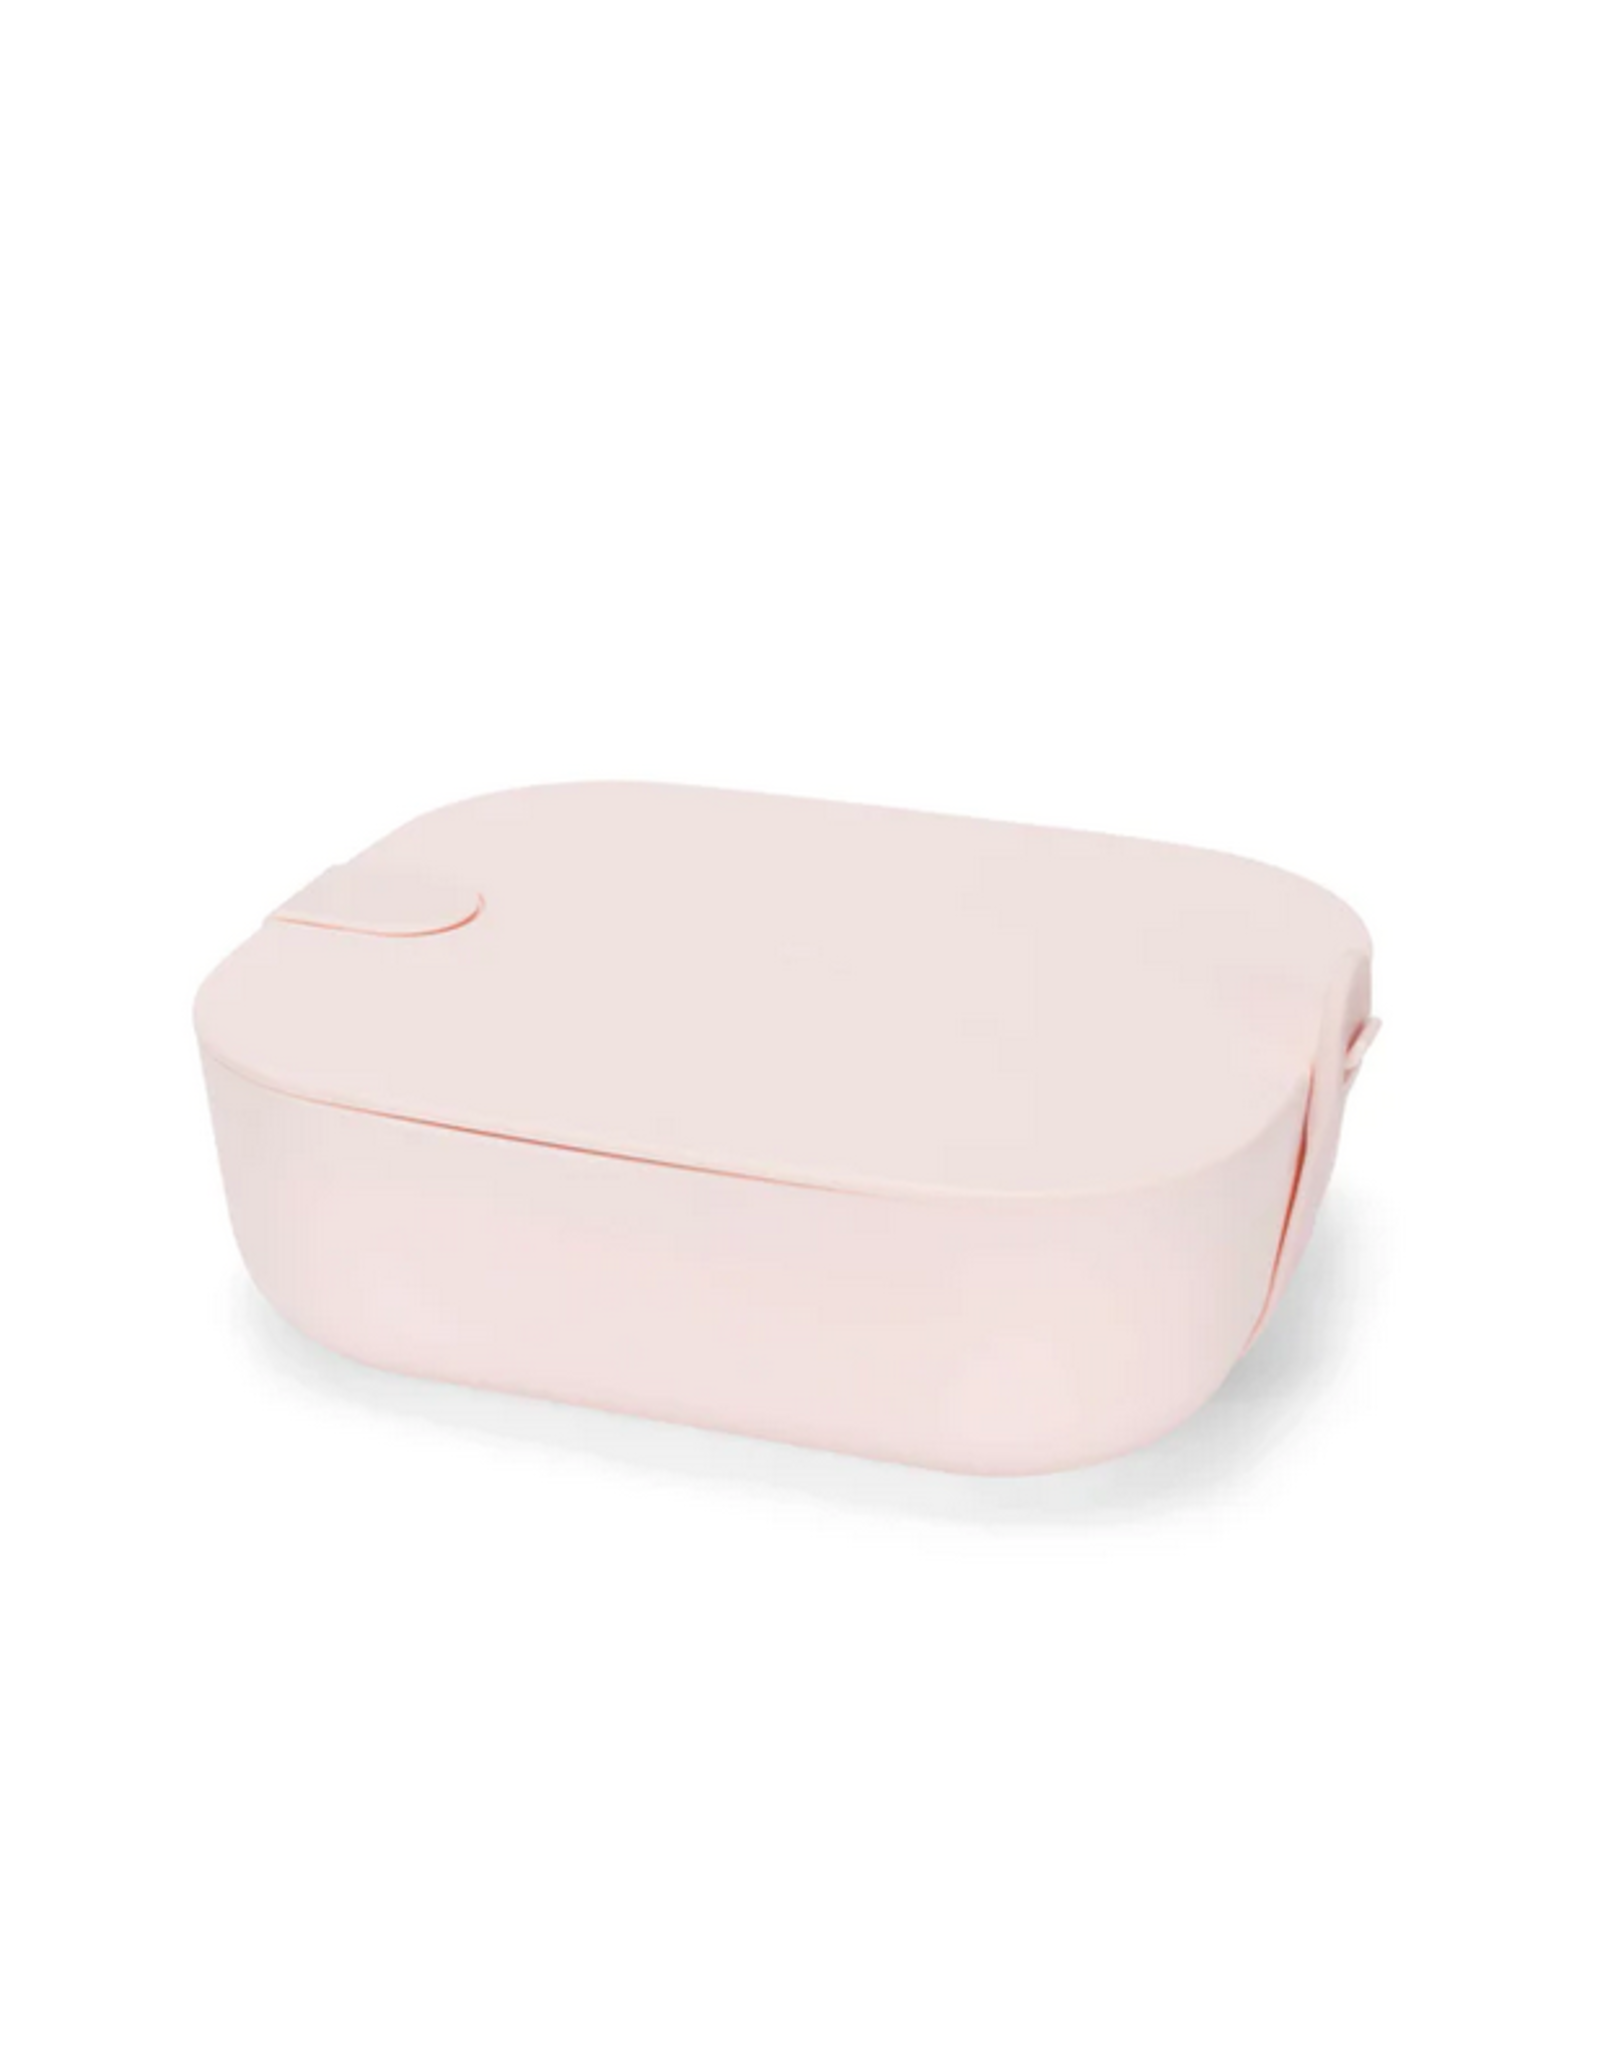 W&P WP0LB-BL The Porter Lunch Box Blush - The Mercantile at Springdale